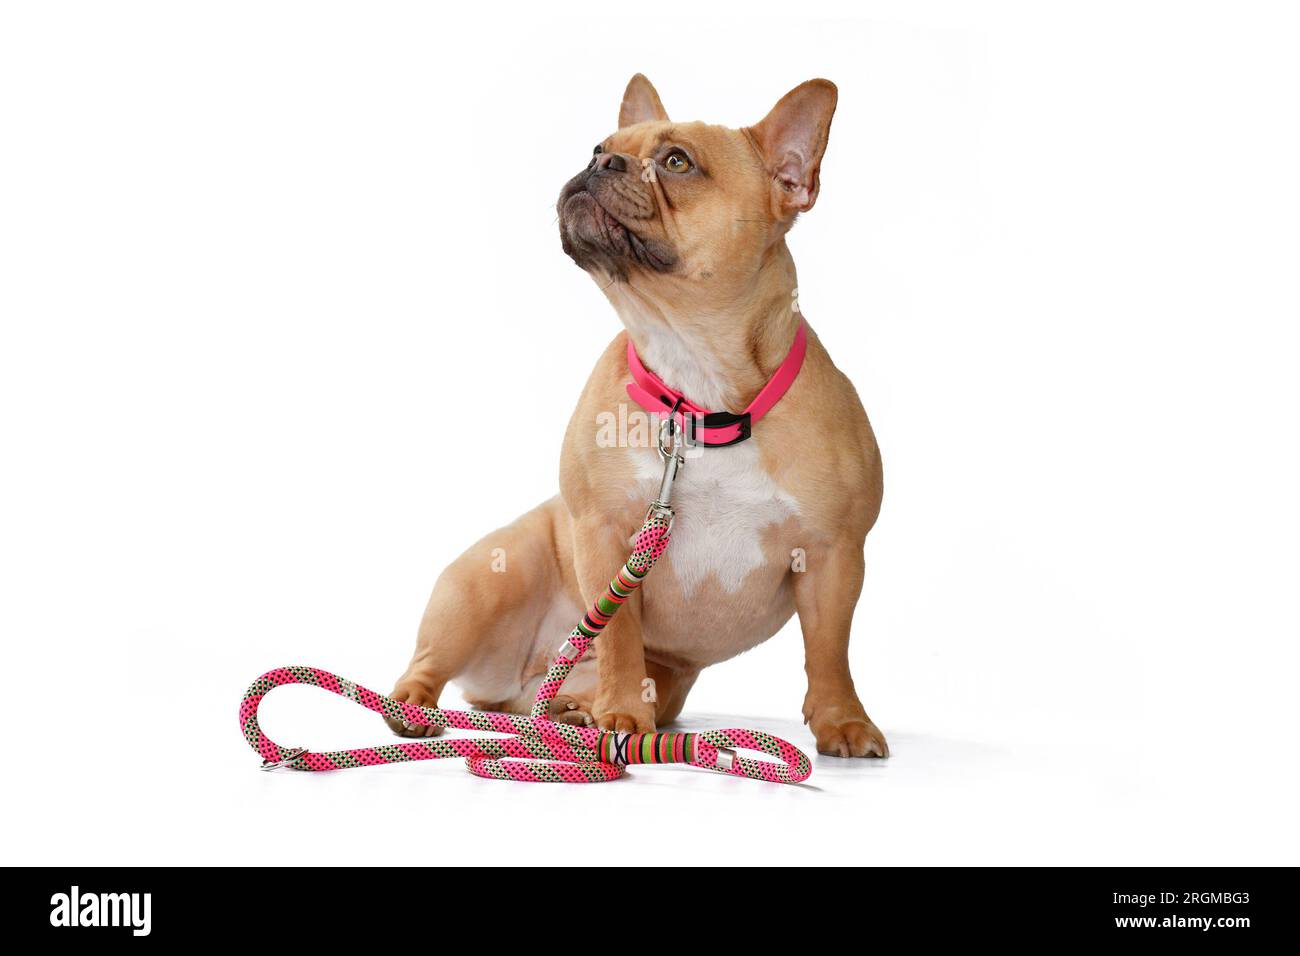 Red fawn French Bulldog dog wearing pink collar with rope leash on white background Stock Photo